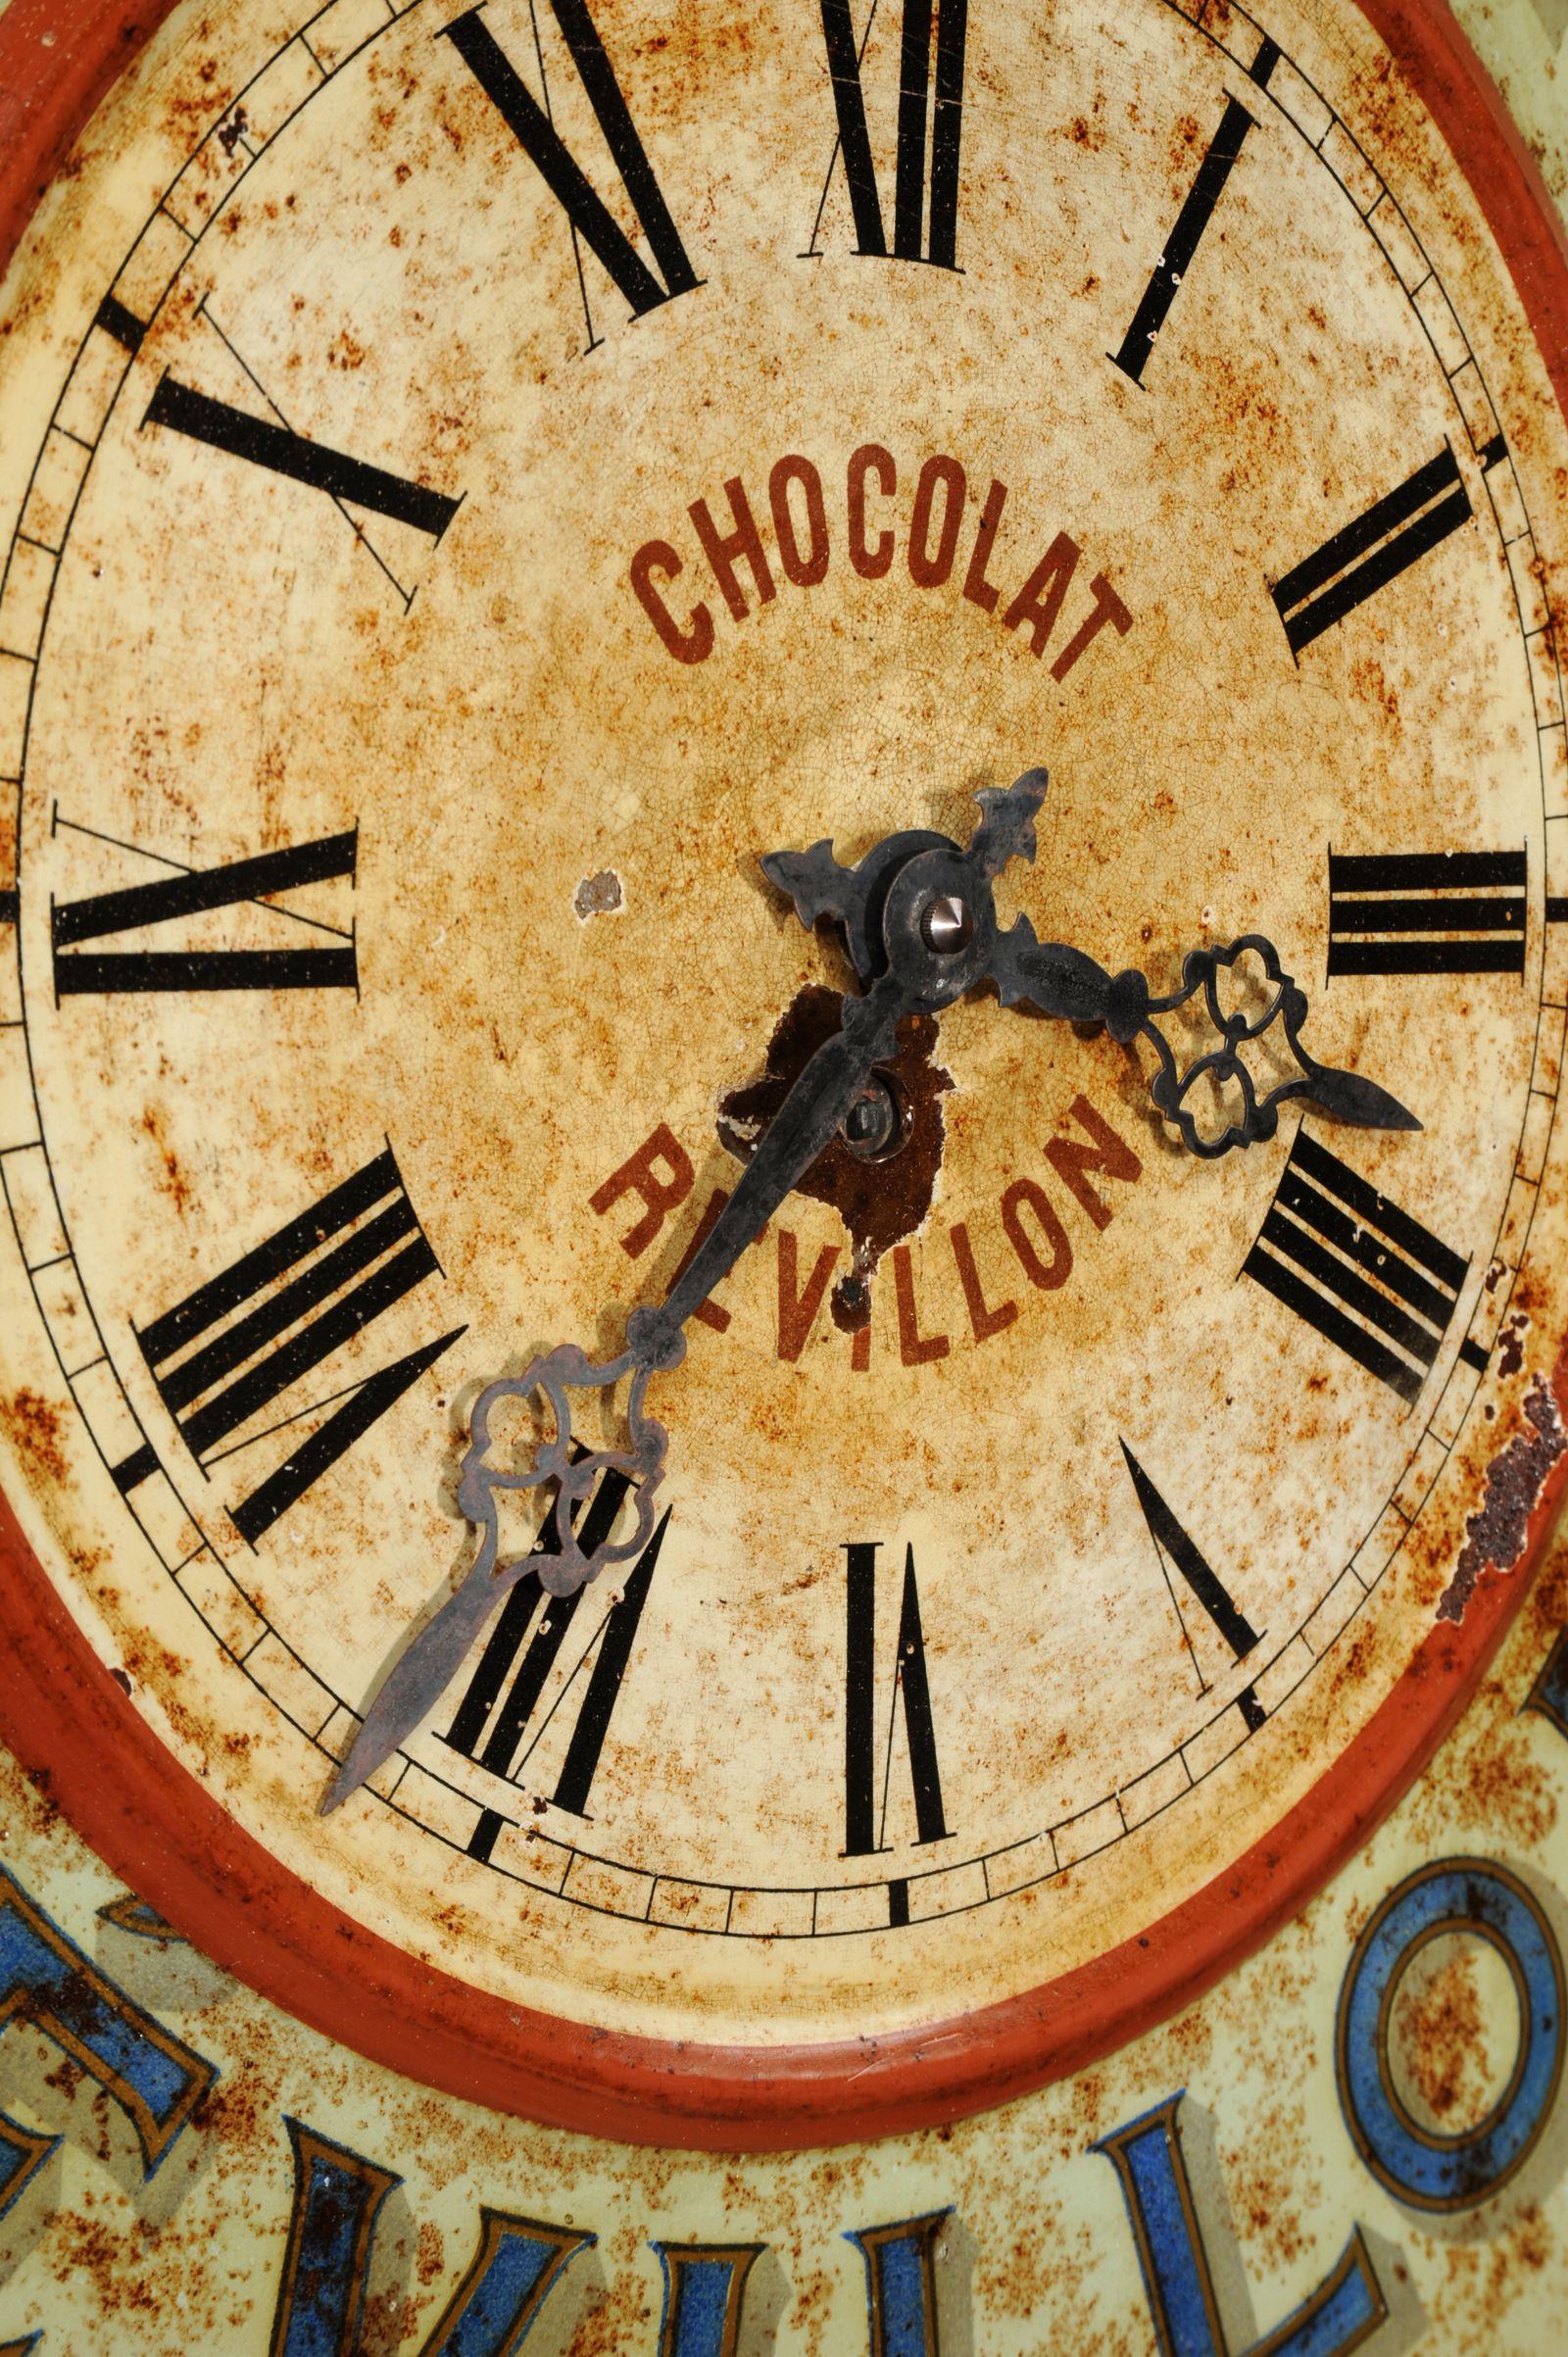 Metal Original French Revillon Chocolate Advertising Wall Clock, Fully Working For Sale